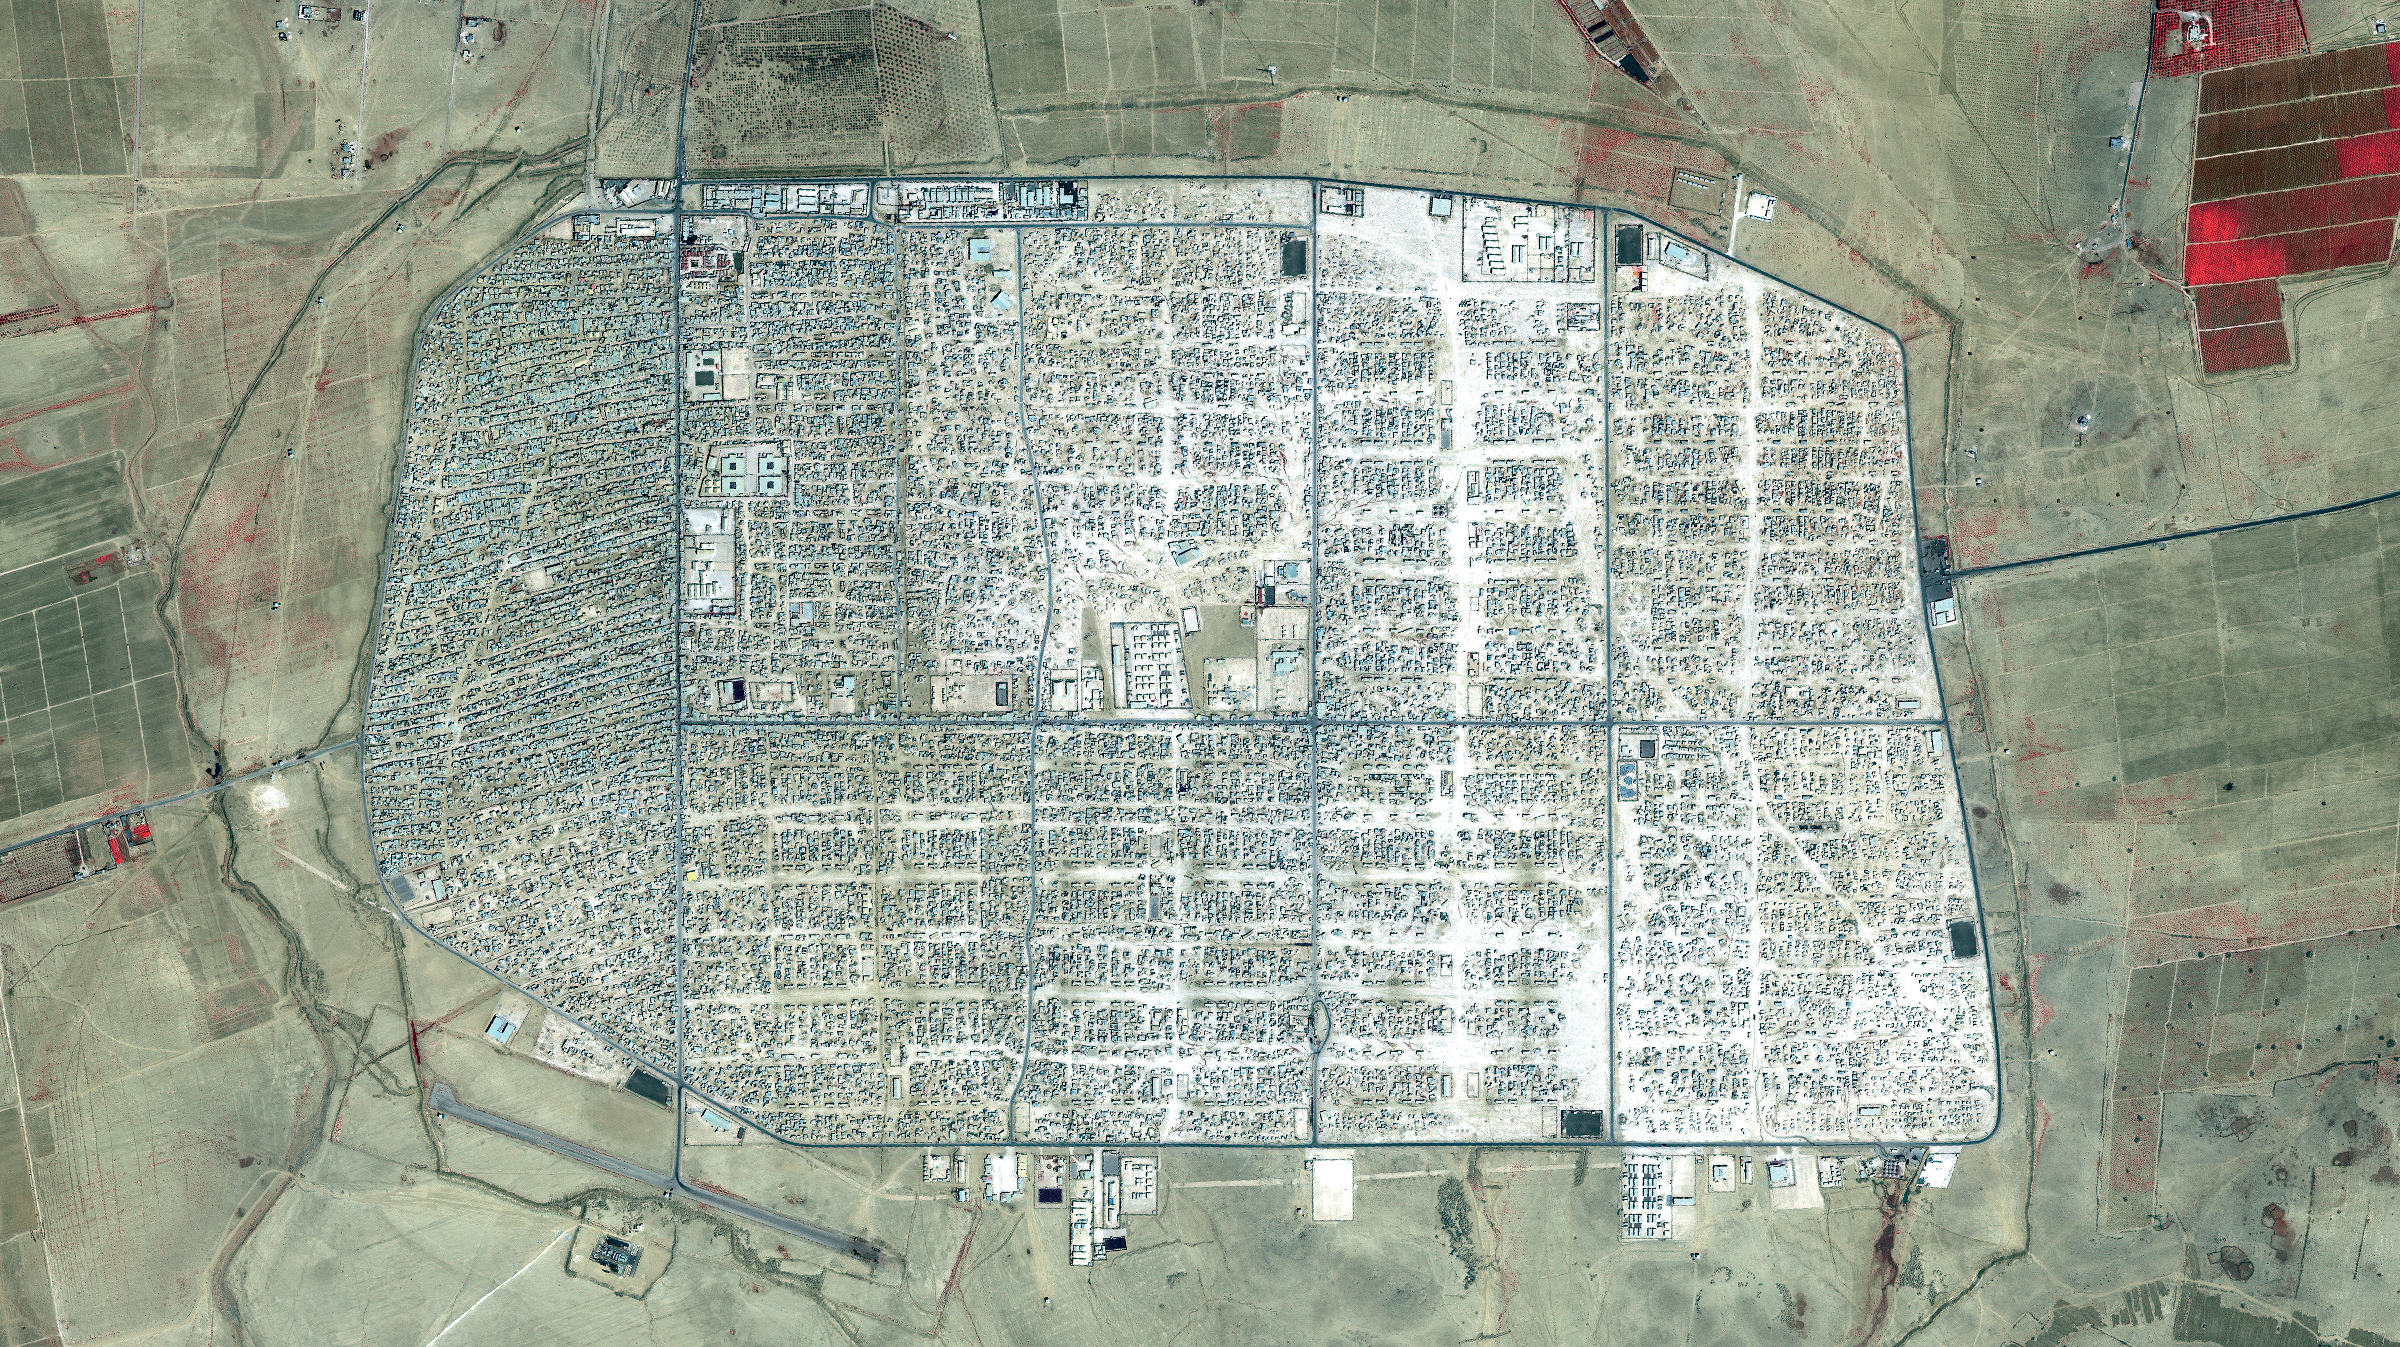 <strong>Zaatari, Jordan</strong> <em>1:25,000</em> Home to about 80,000 Syrian refugees, Zaatari is the largest refugee camp in the Middle East, now functioning as an informal city for its residents. Globally, the number of displaced people reached an unprecedented record in 2015, exceeding 65 million, more than the populations of Canada, Australia and New Zealand combined. (QuickBird, Satellite image courtesy of DigitalGlobe (www.digitalglobe.com), Inc.)